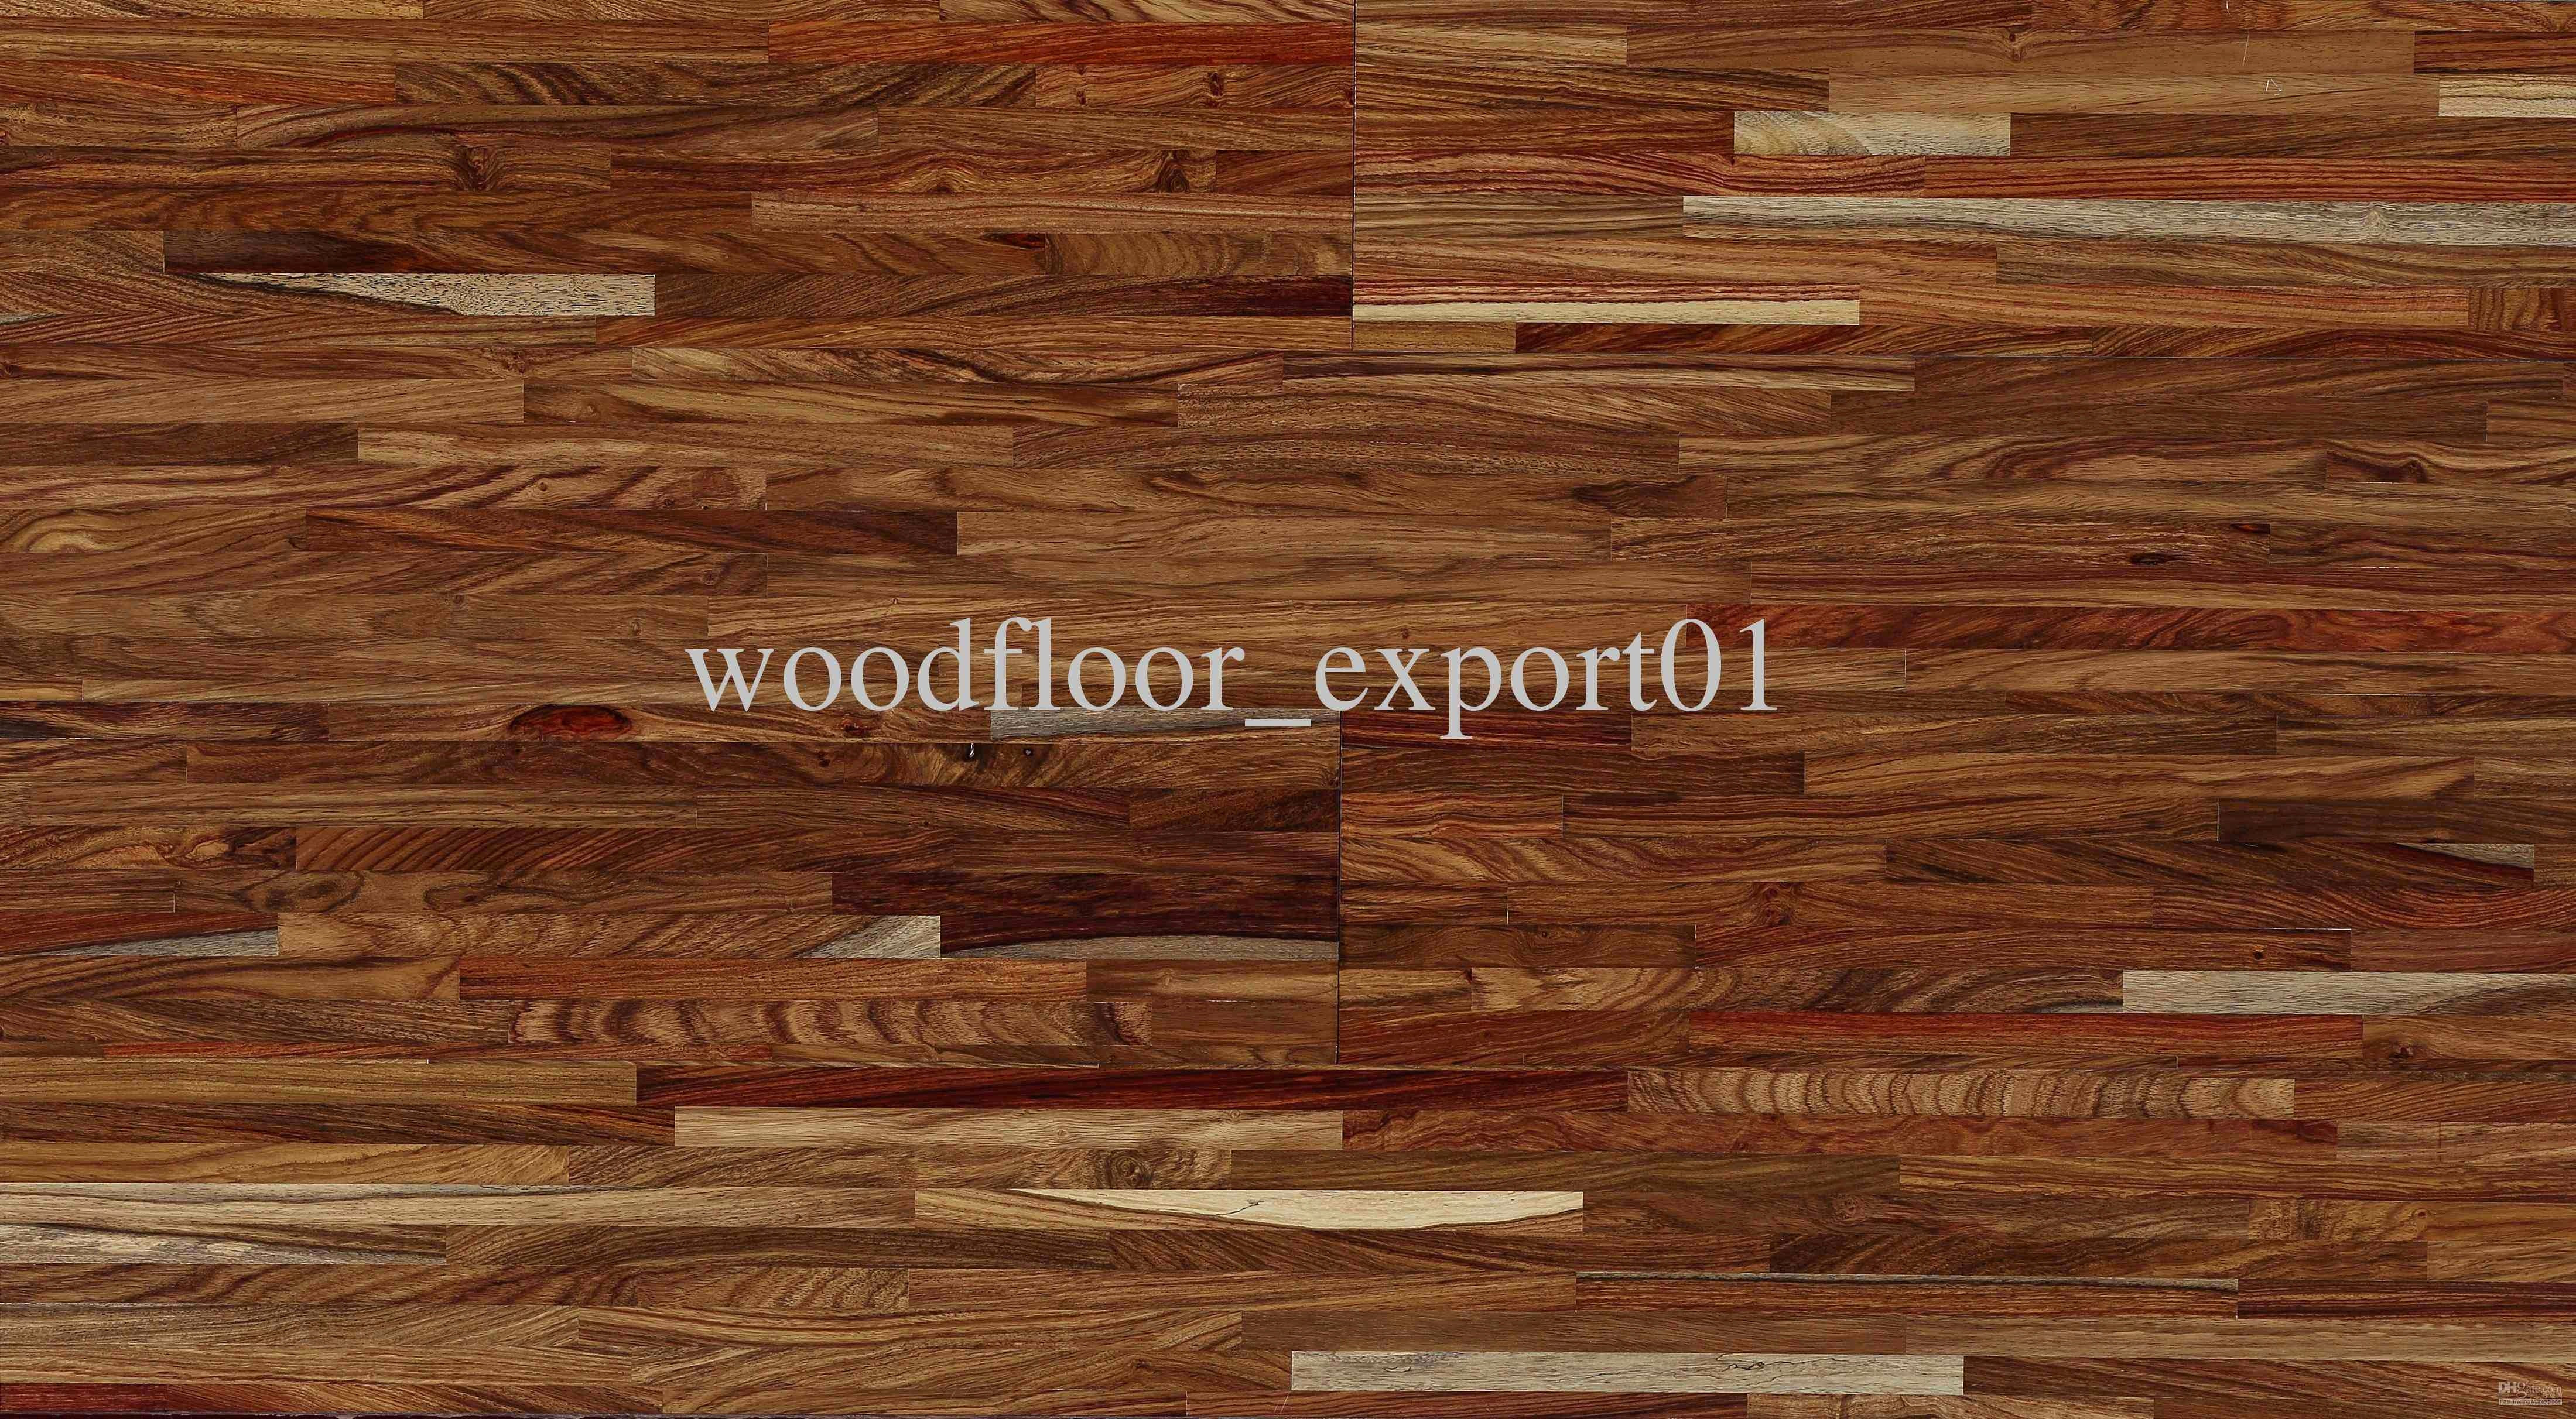 27 attractive Refinishing Bruce Engineered Hardwood Floors 2024 free download refinishing bruce engineered hardwood floors of 19 luxury hardwood refinishing stock dizpos com intended for hardwood refinishing awesome 50 new restaining hardwood floors 50 s photos of 19 